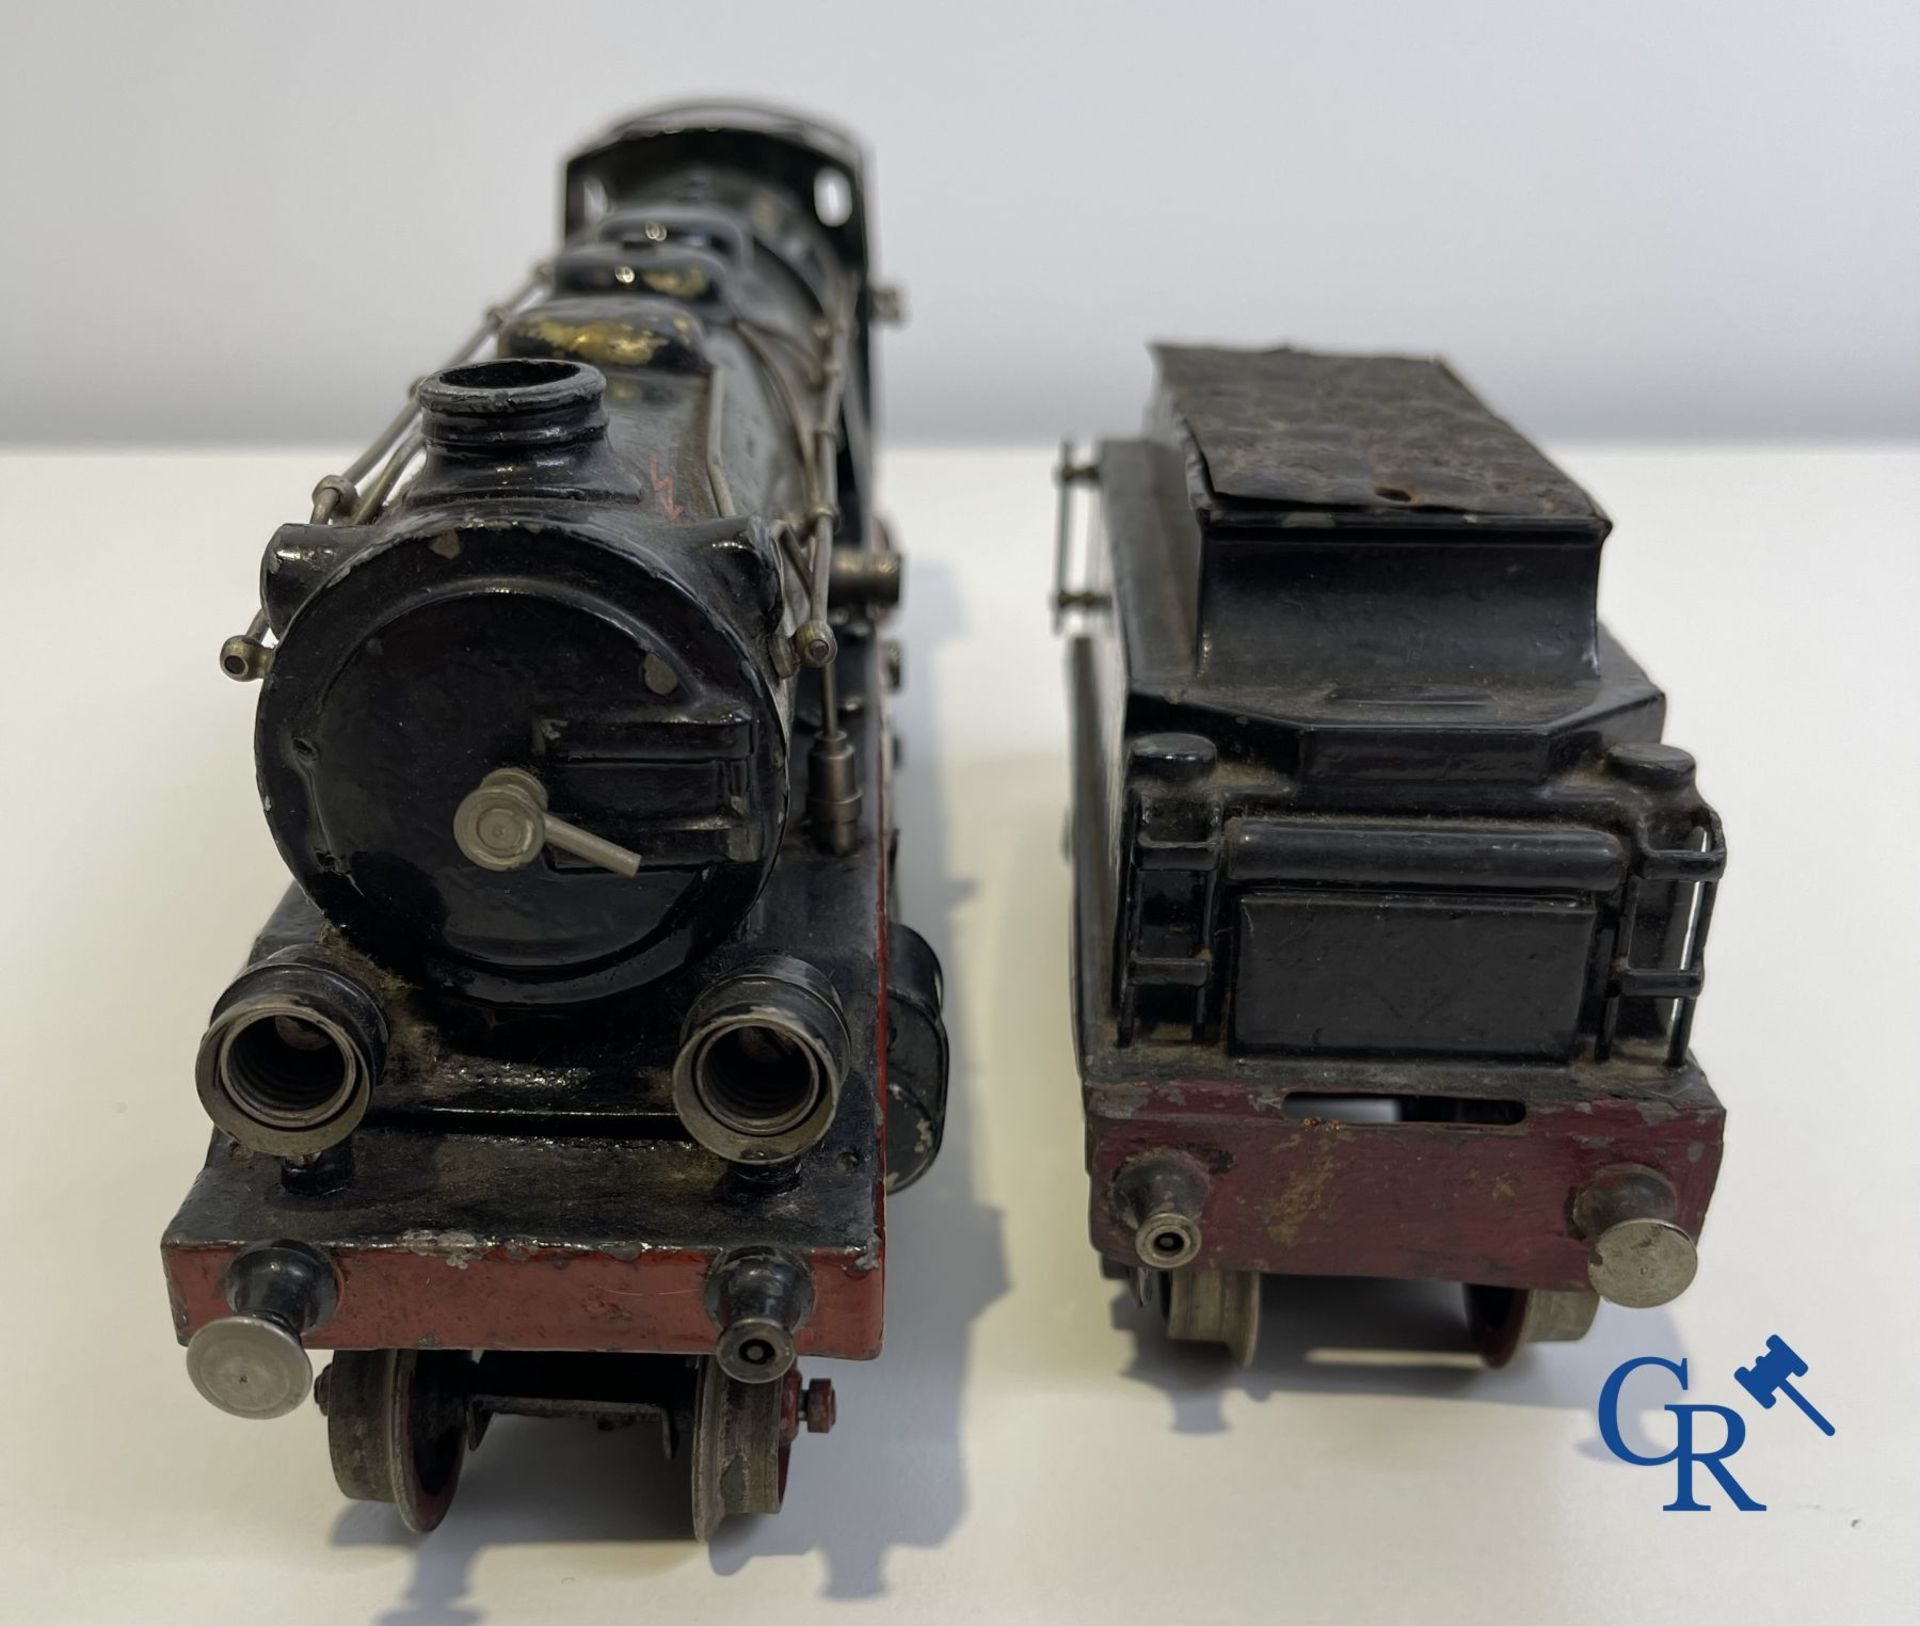 Old toys: Märklin, Locomotive with towing tender and dining car.
About 1930. - Image 13 of 32